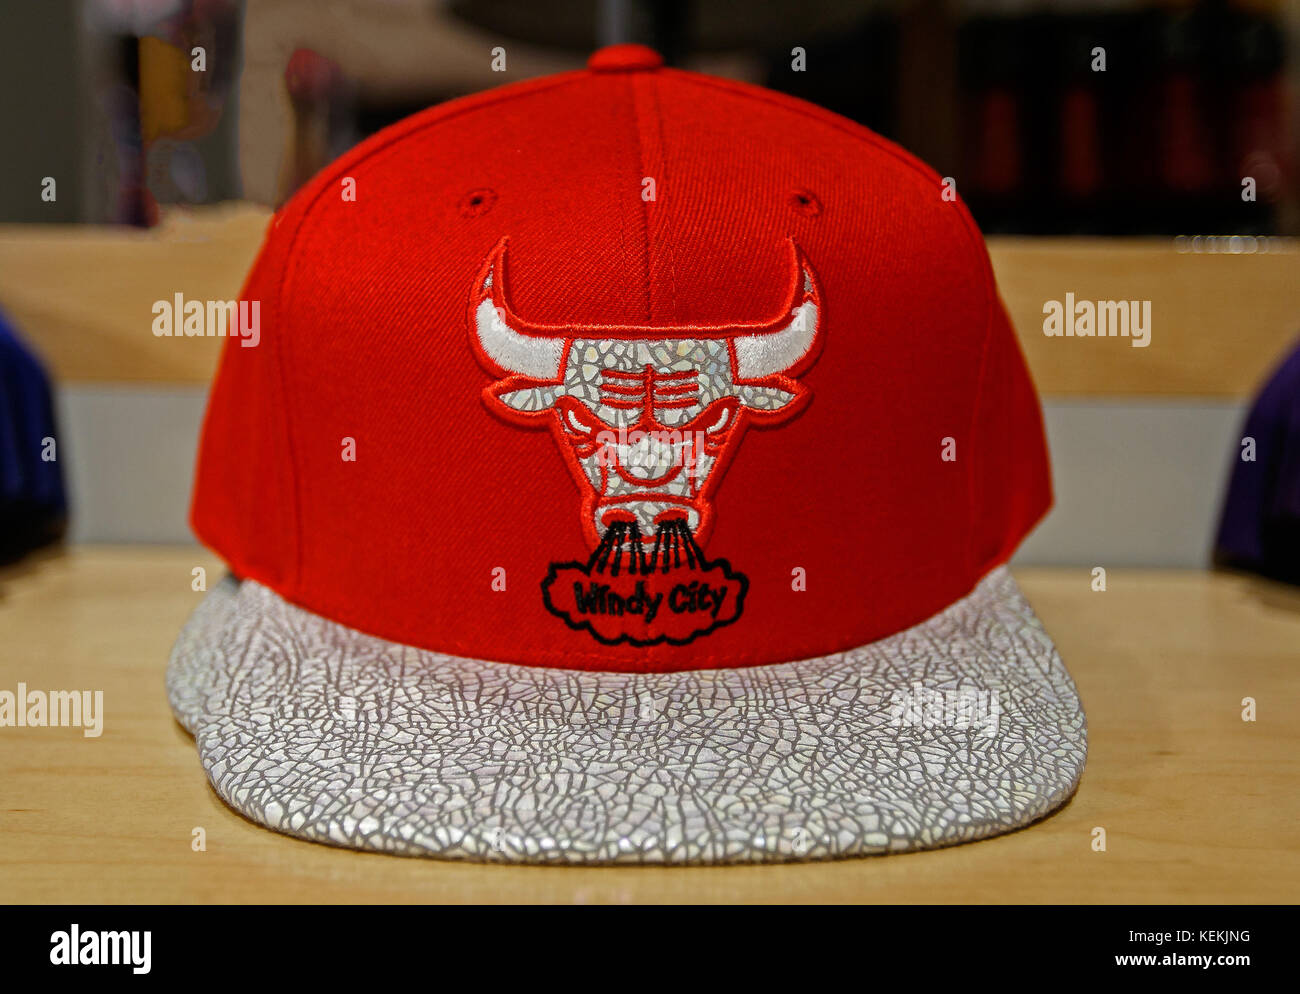 Chicago Bulls hat on sale in the NBA store in Manhattan Stock Photo - Alamy